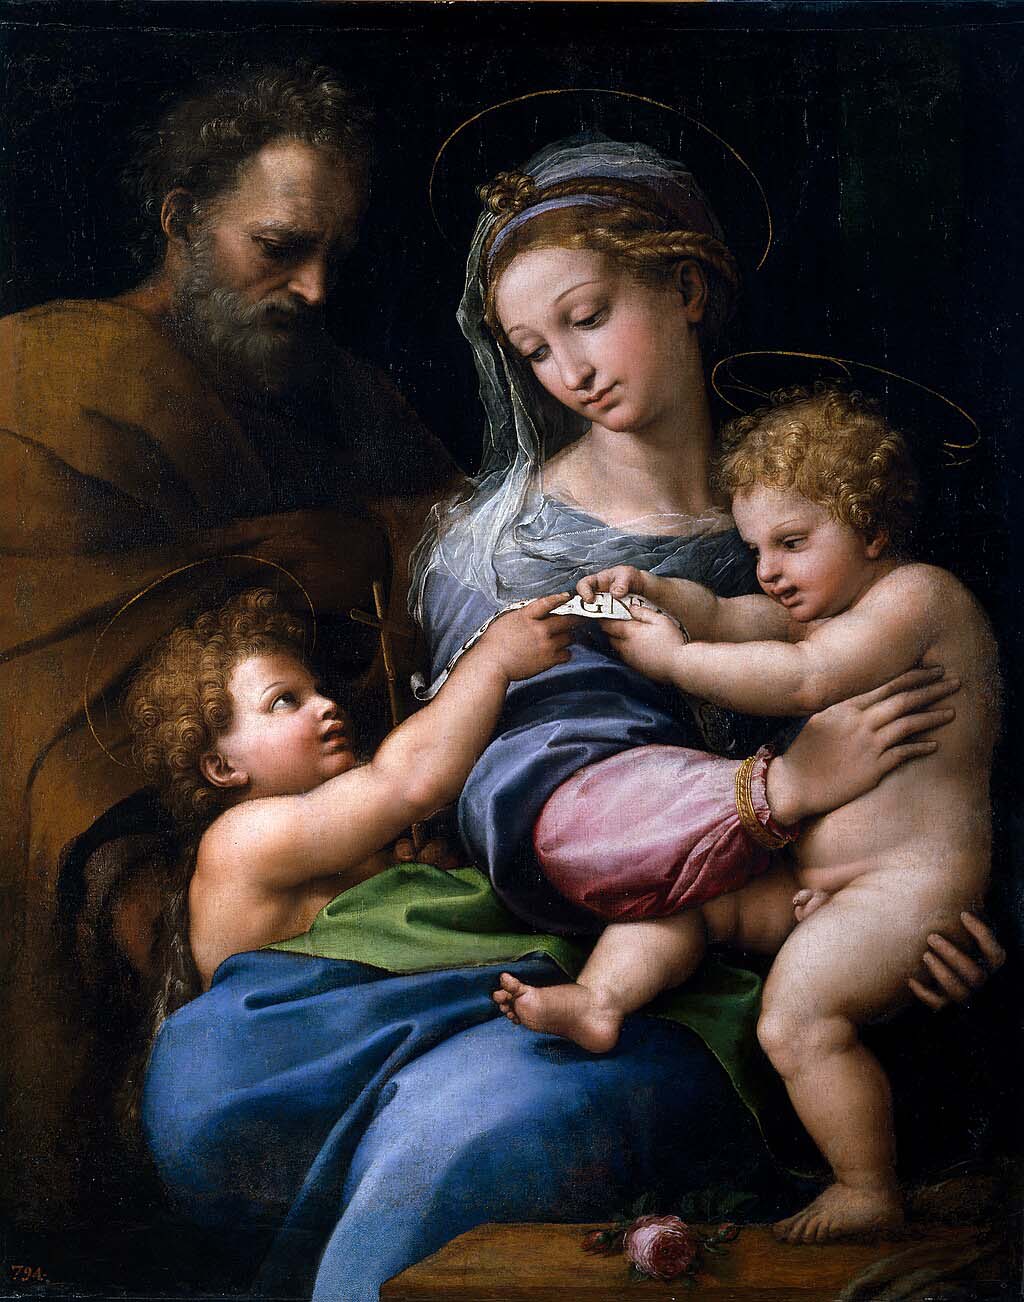 The Madonna Of The Rose (Madonna Della Rosa) Is A Raphael Painting Depicting The Virgin Mary, Young John The Baptist, And The Baby Jesus With Saint Joseph.